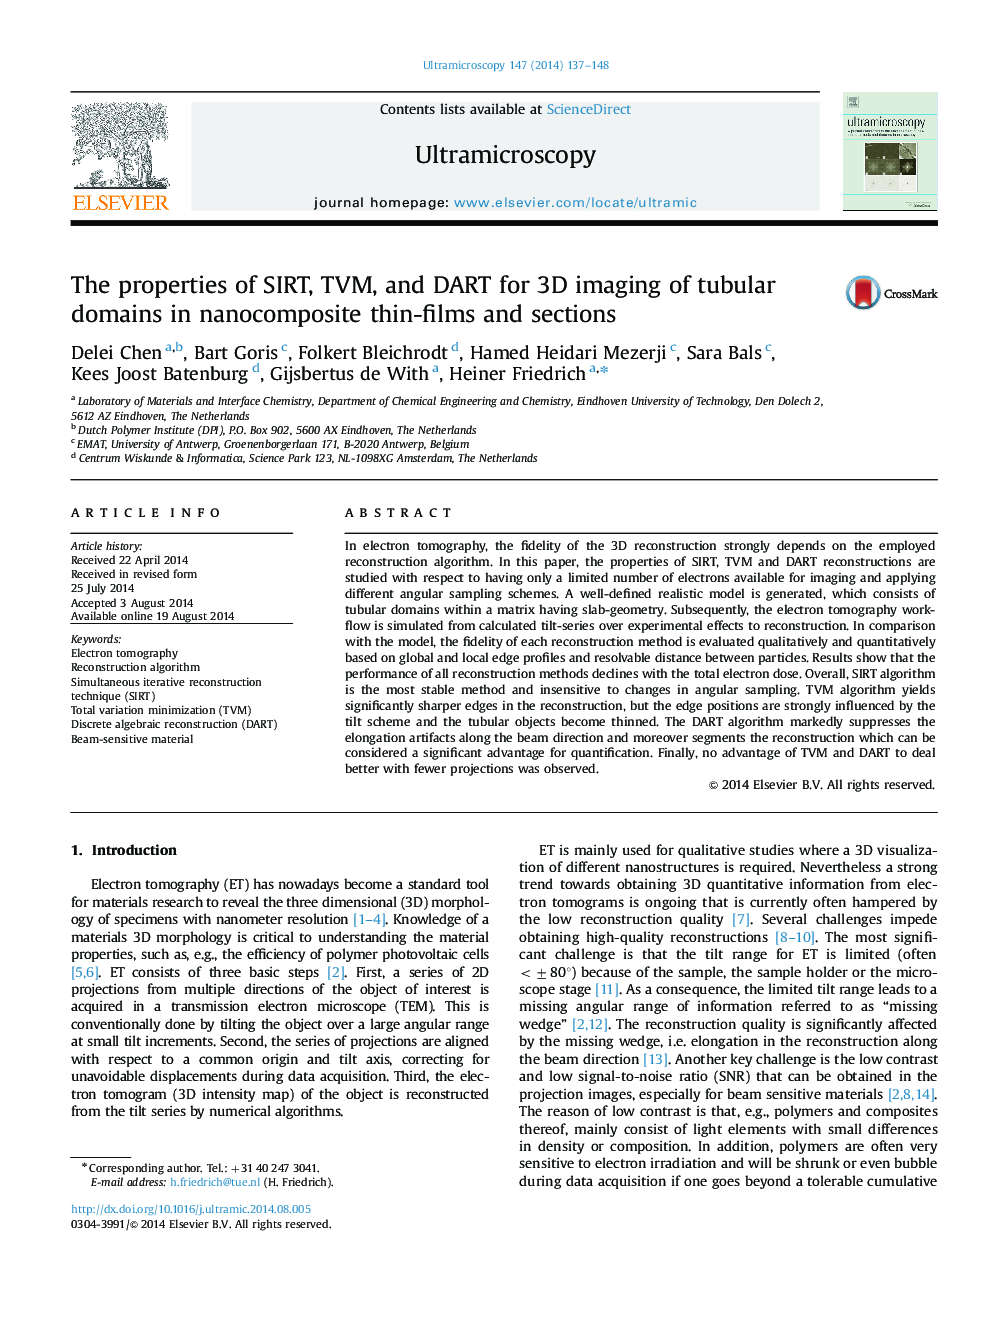 The properties of SIRT, TVM, and DART for 3D imaging of tubular domains in nanocomposite thin-films and sections